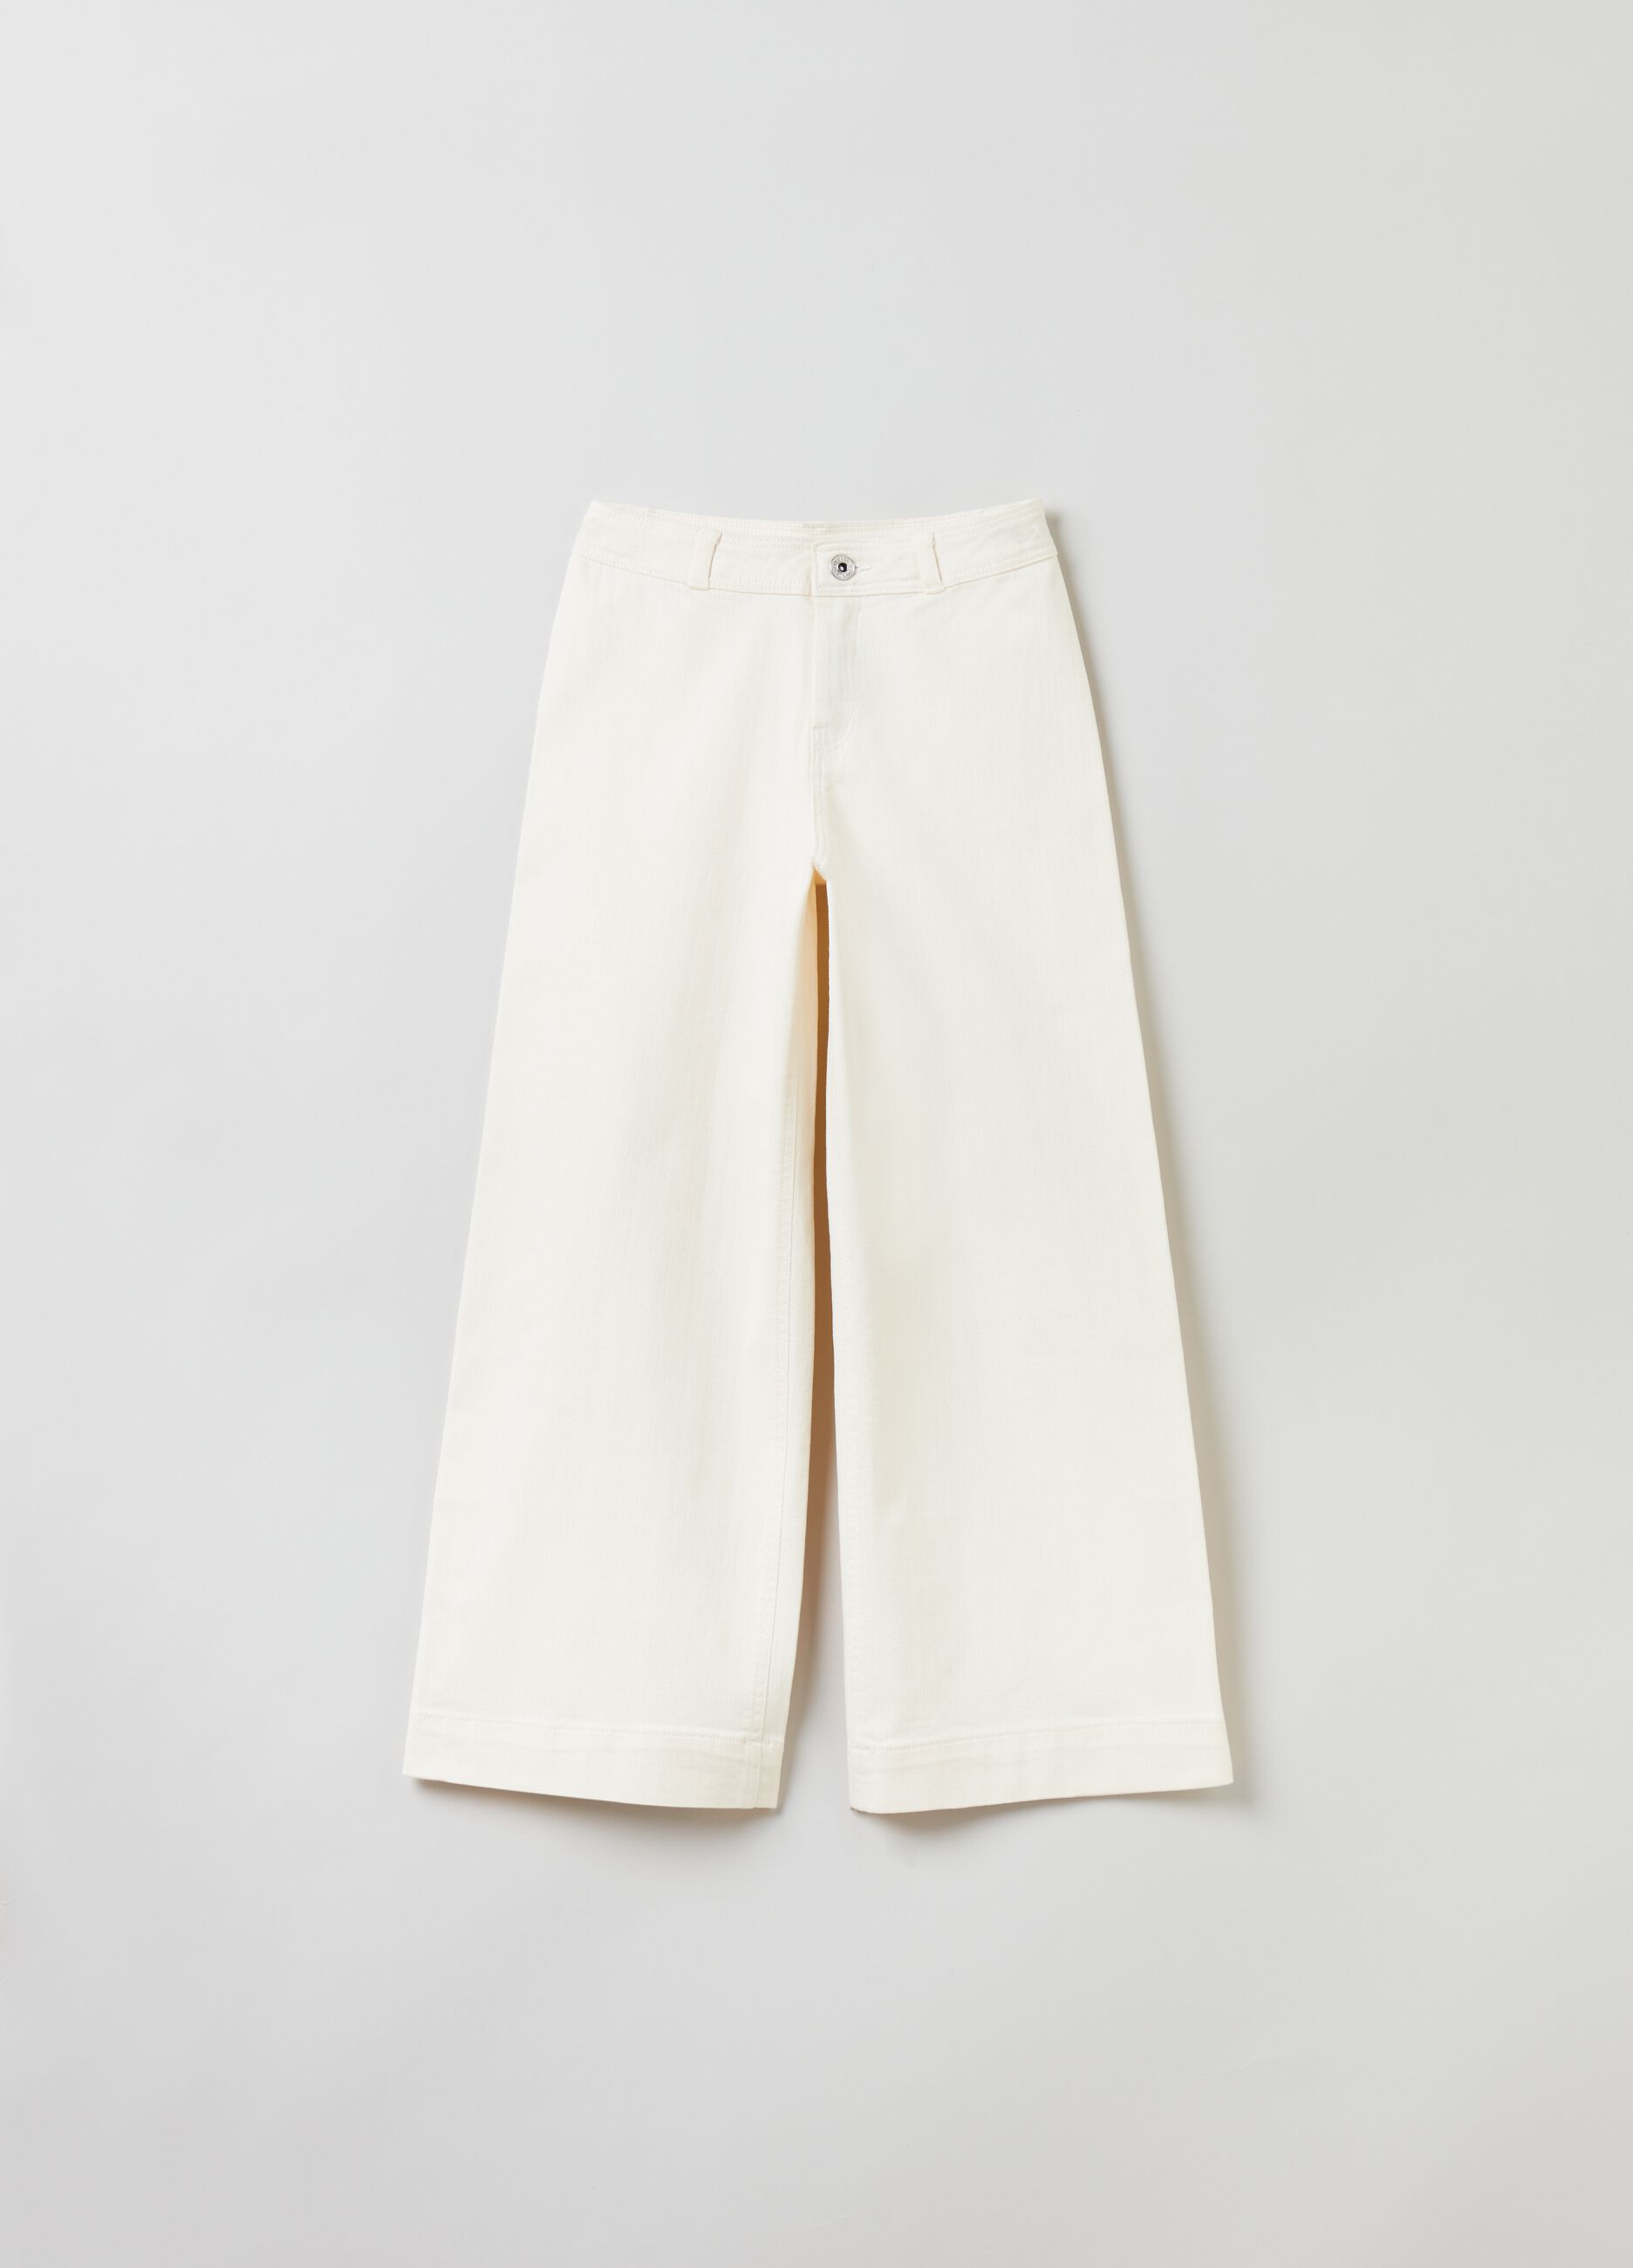 1,275 Culotte Trousers Royalty-Free Photos and Stock Images | Shutterstock